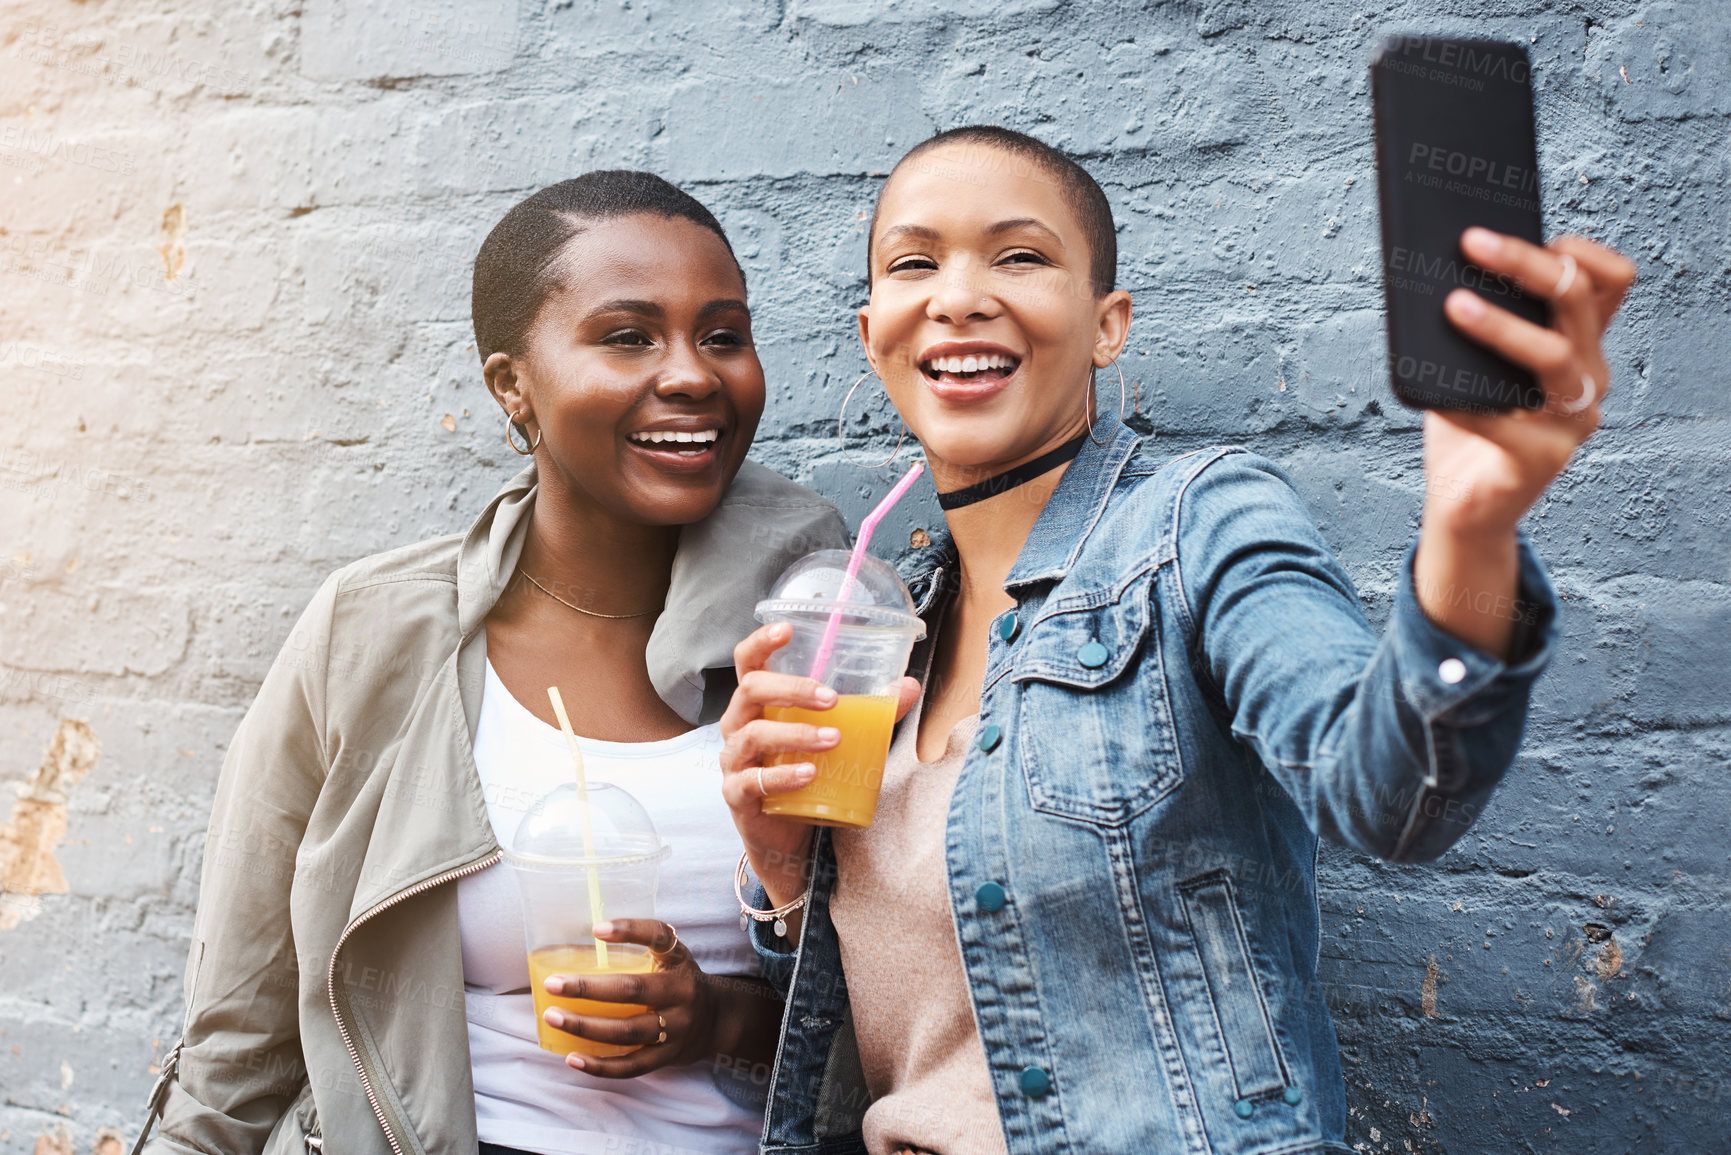 Buy stock photo Shot of two young women standing beside a building smiling and taking selfies while holding their cool drinks